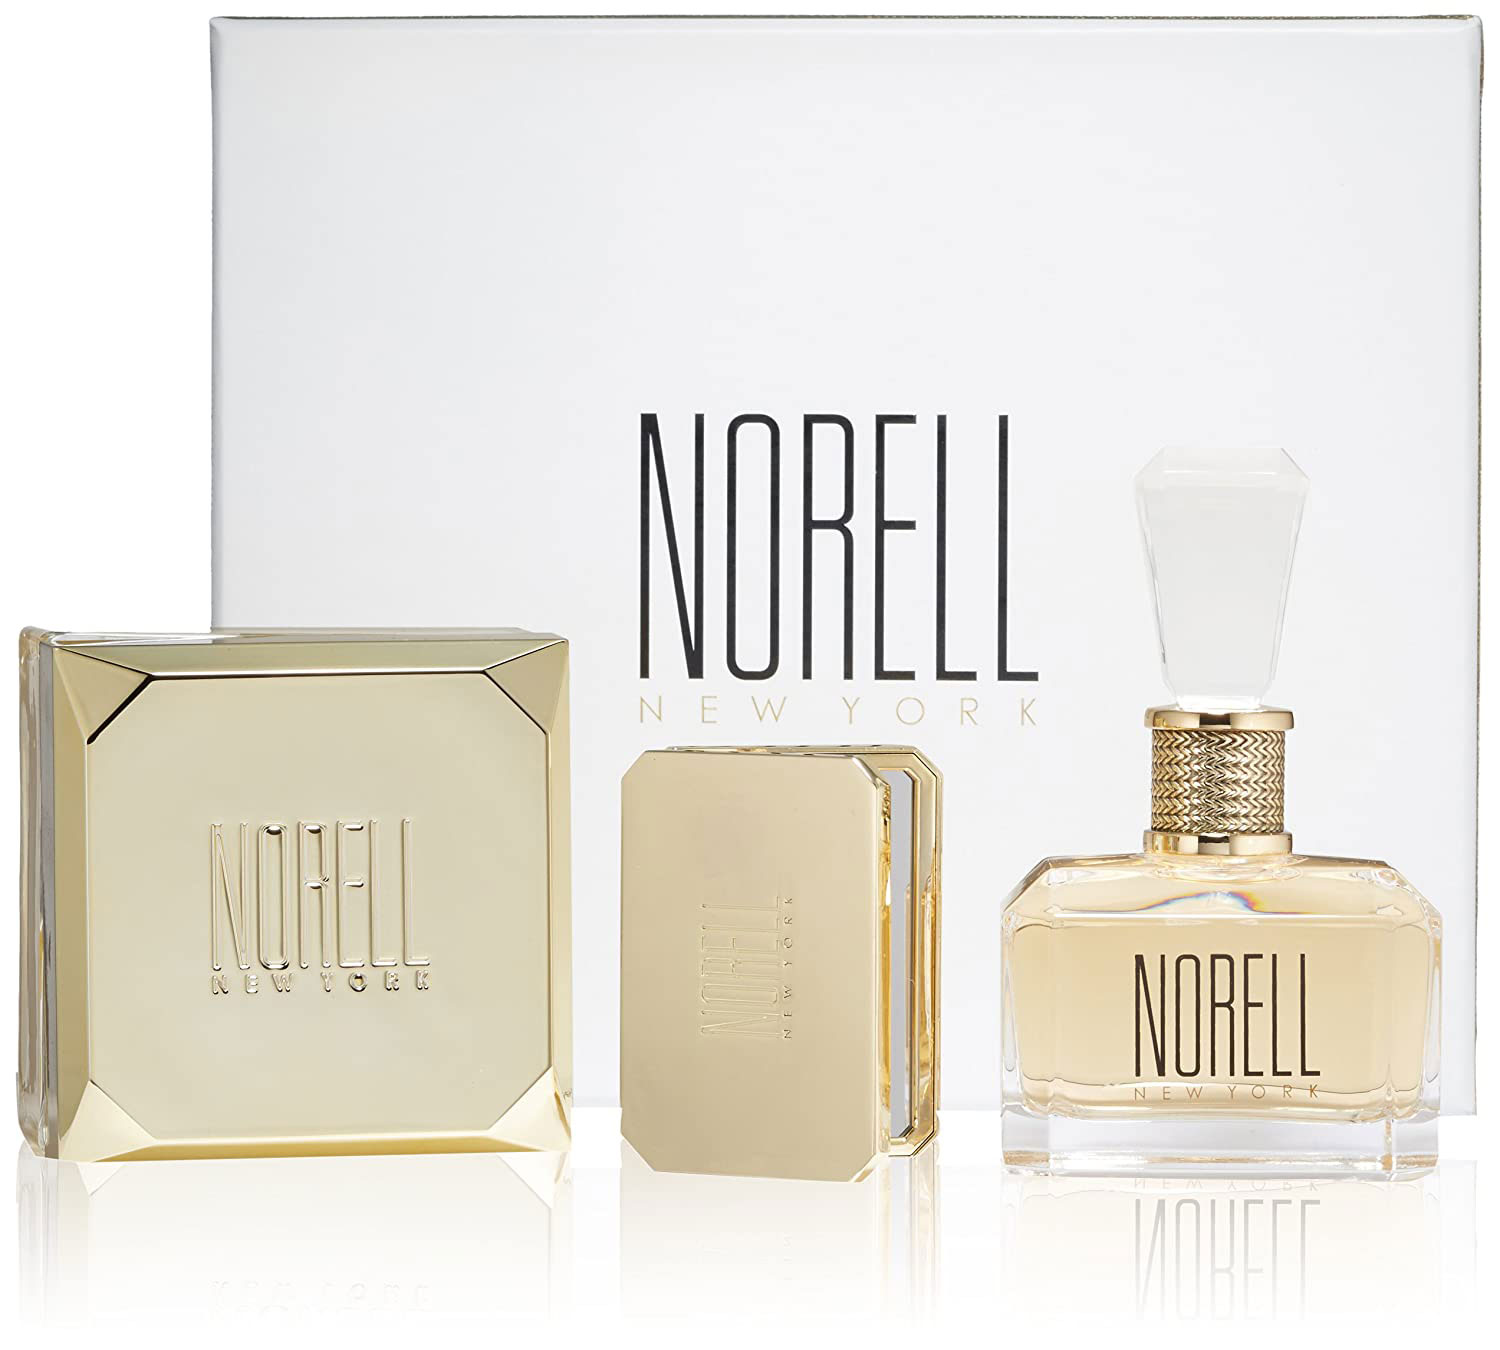 NORELL NEW YORK Women's Legacy 3-PC Gift Set $245 NEW